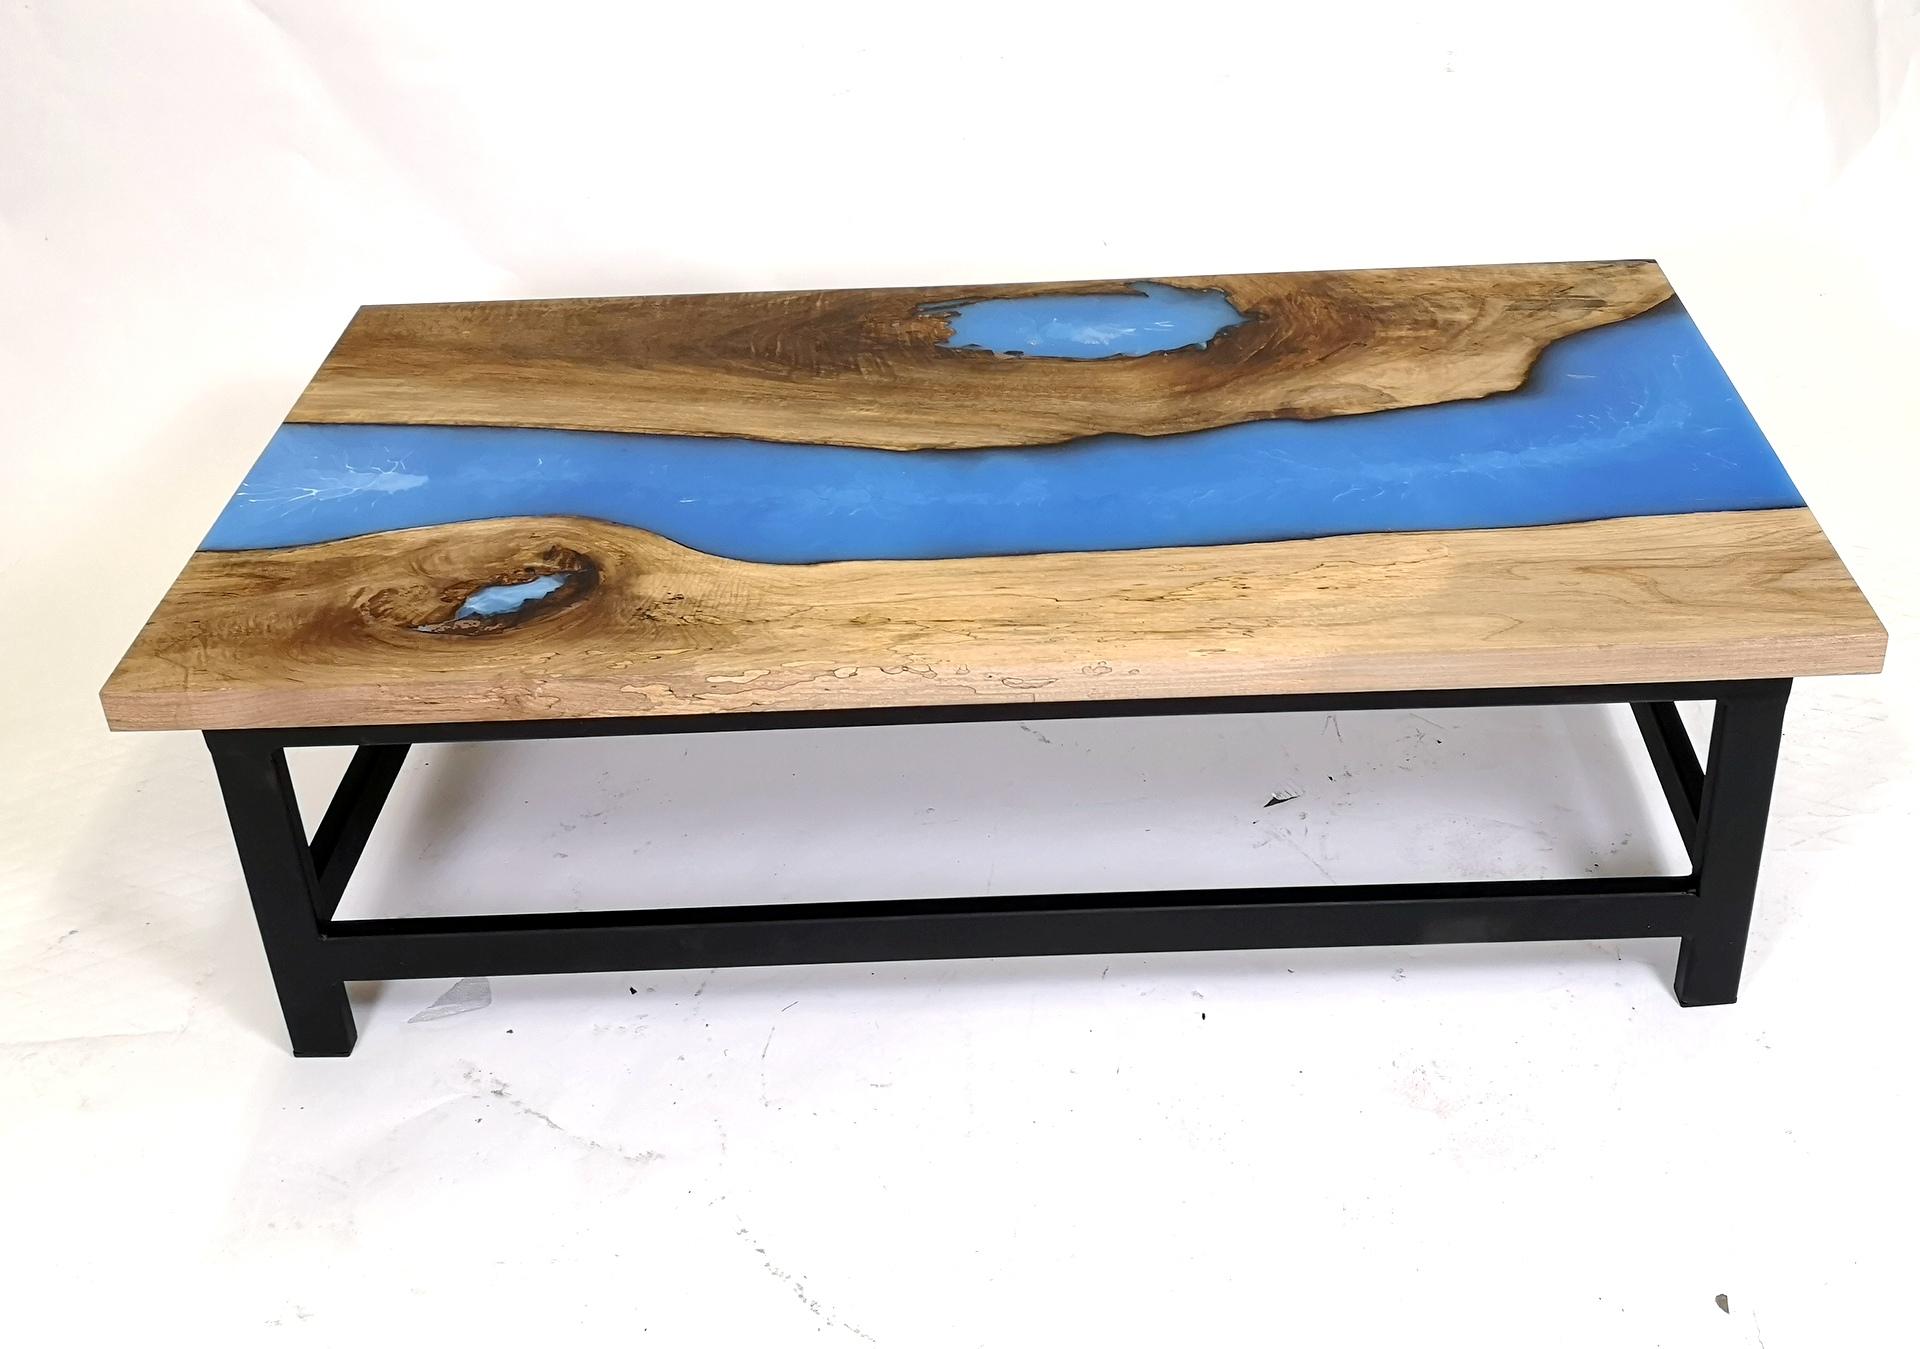 The coffee table was made in Hungary with walnut wood. The wood is kilned and dried prior to being filled with high quality resin and has steel legs.